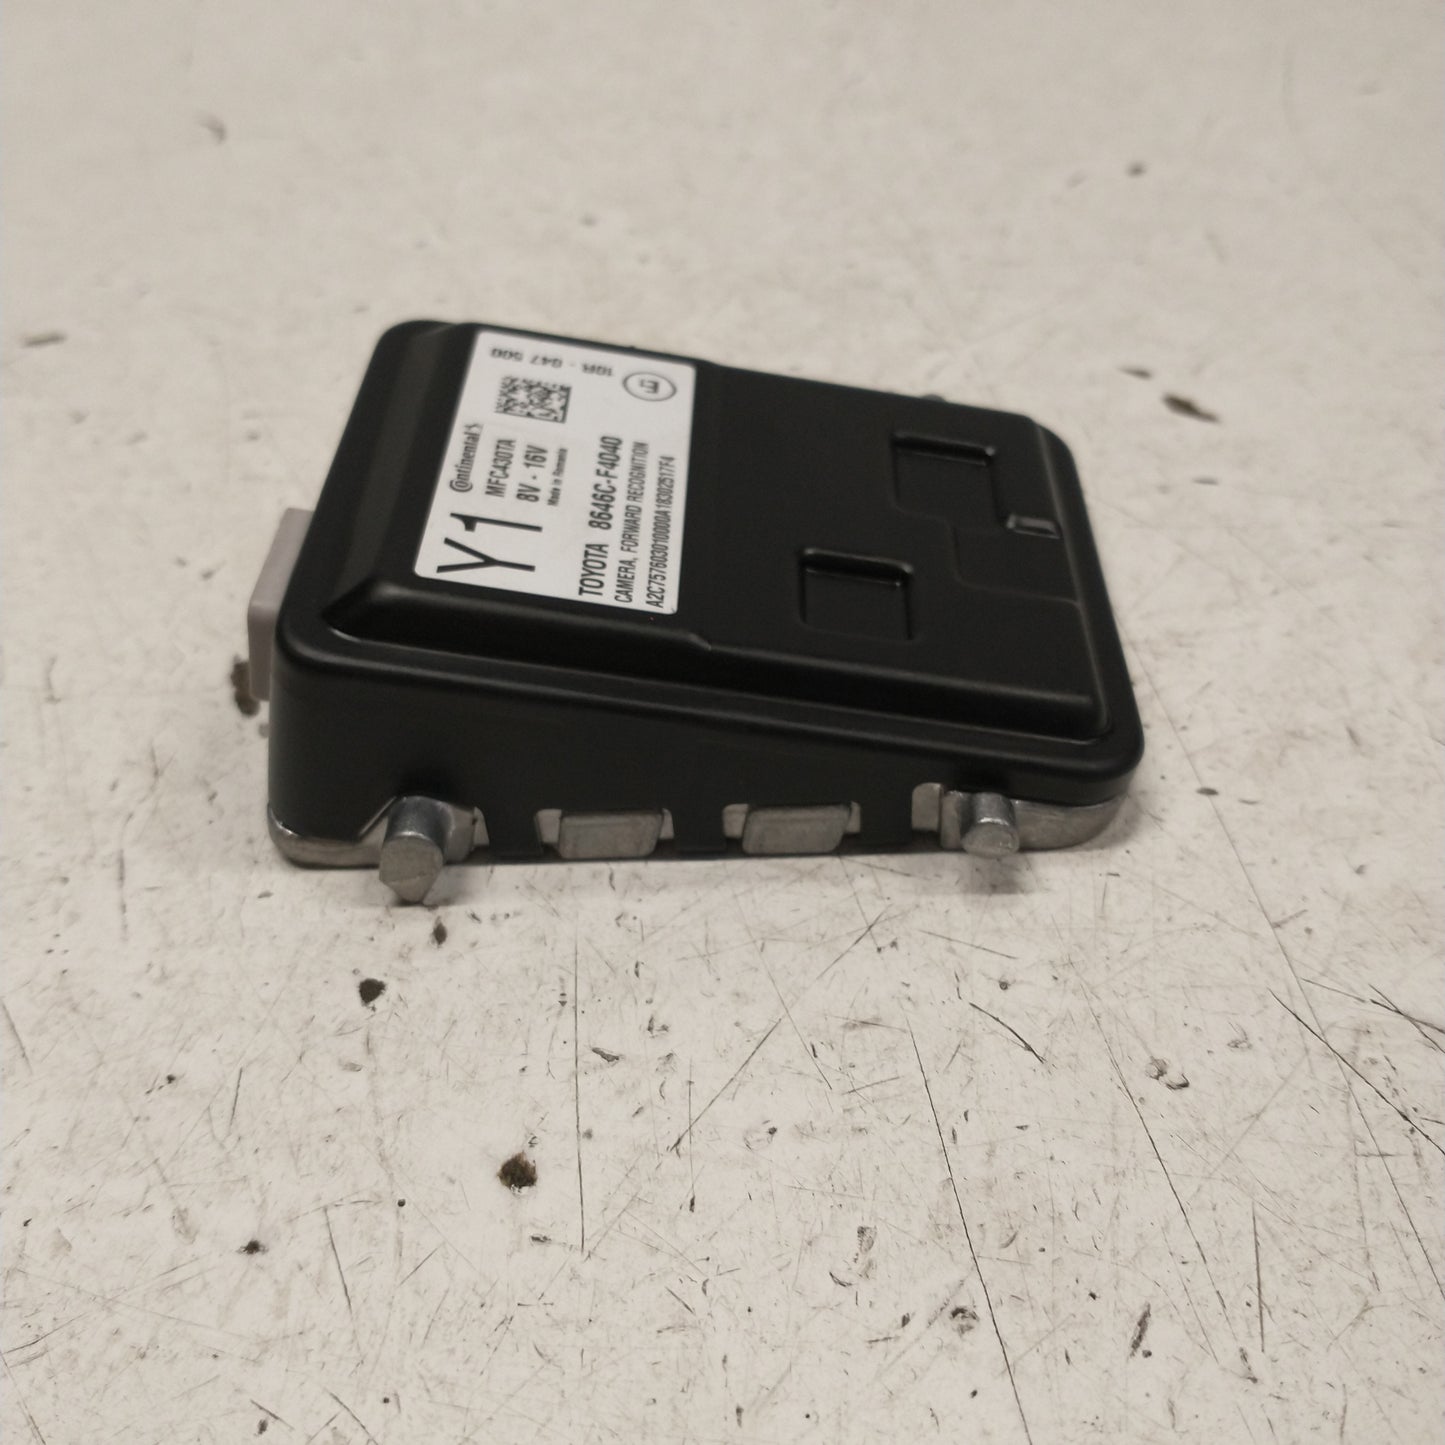 Toyota CHR Forward Recognition Camera Part No. 8646C-F4040 2016 2017 2018 2019